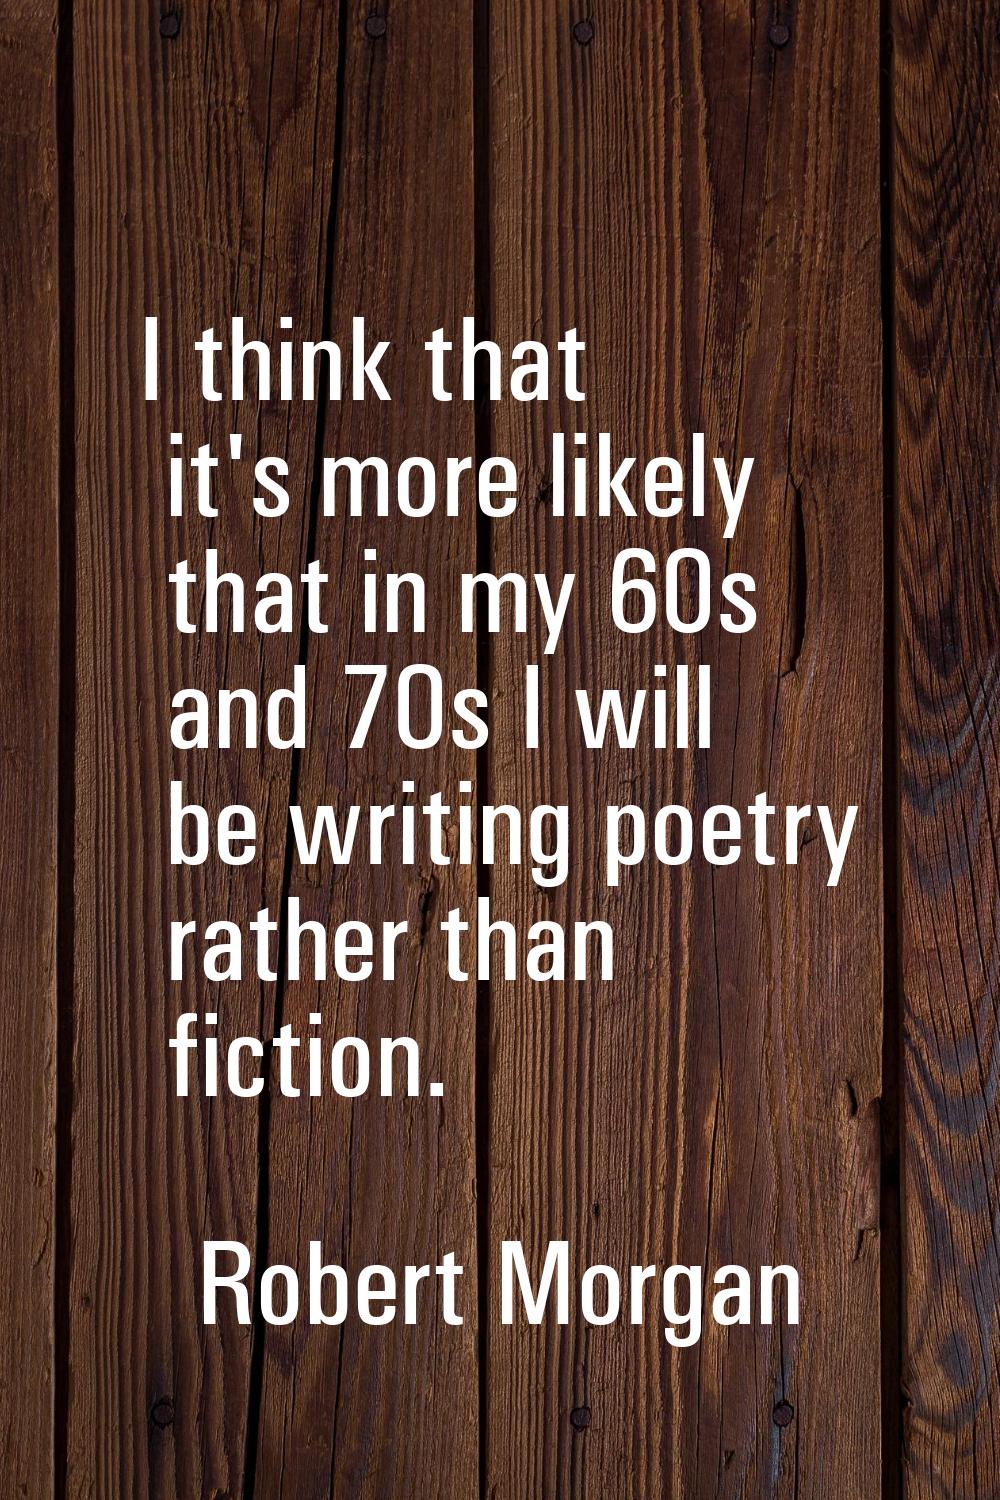 I think that it's more likely that in my 60s and 70s I will be writing poetry rather than fiction.